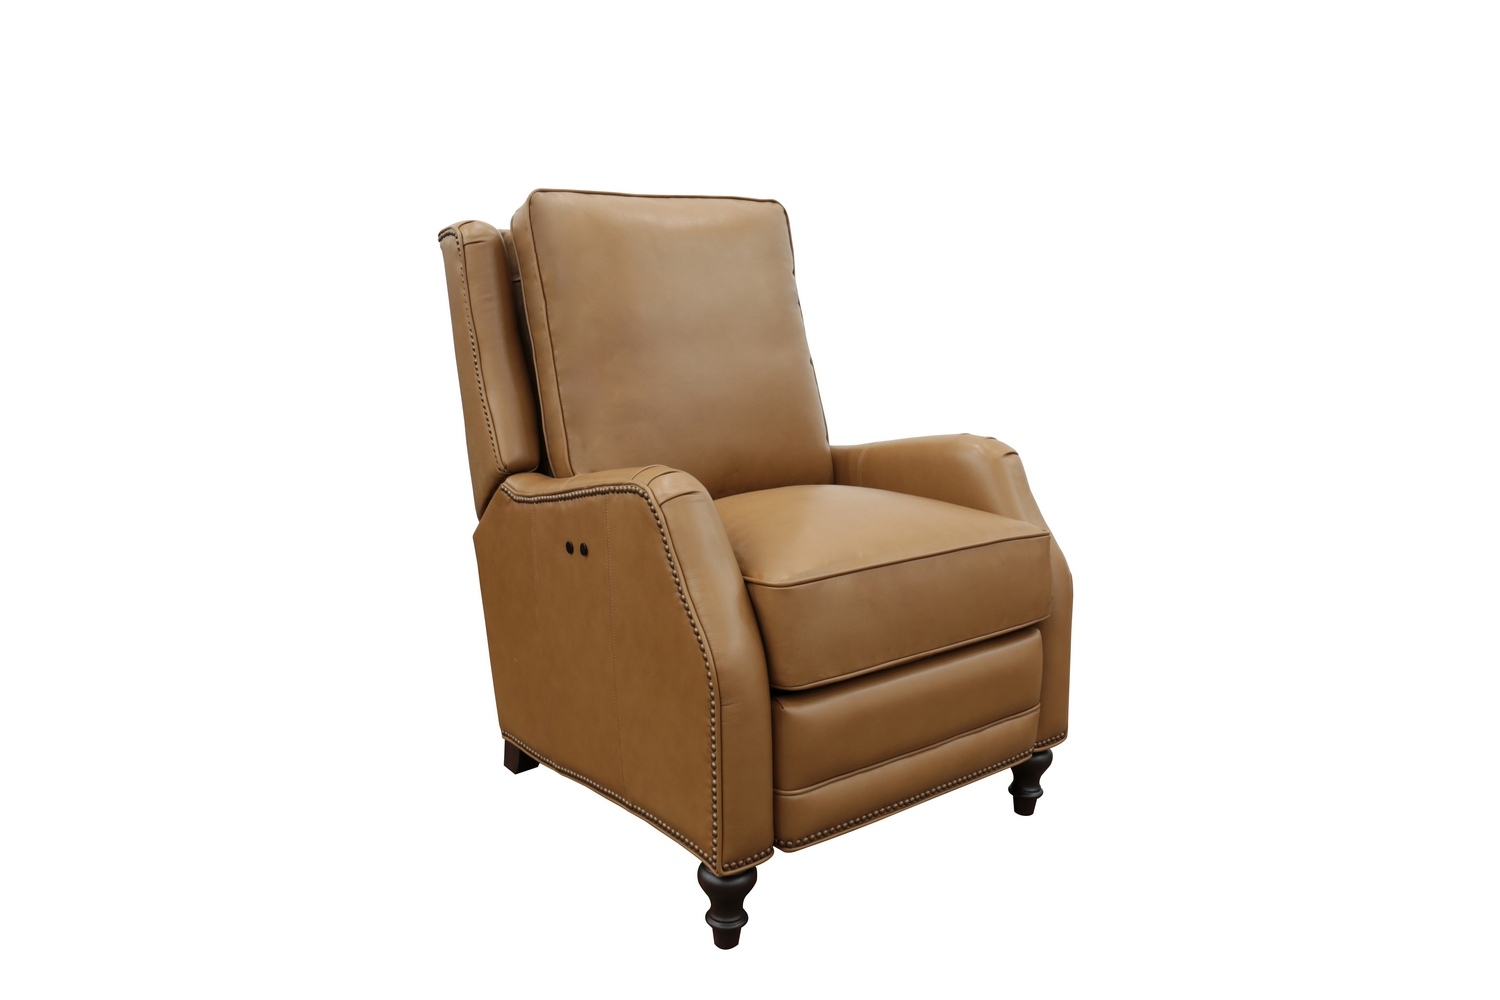 Barcalounger Huntington Power Recliner Chair - Shoreham Ponytail/All Leather